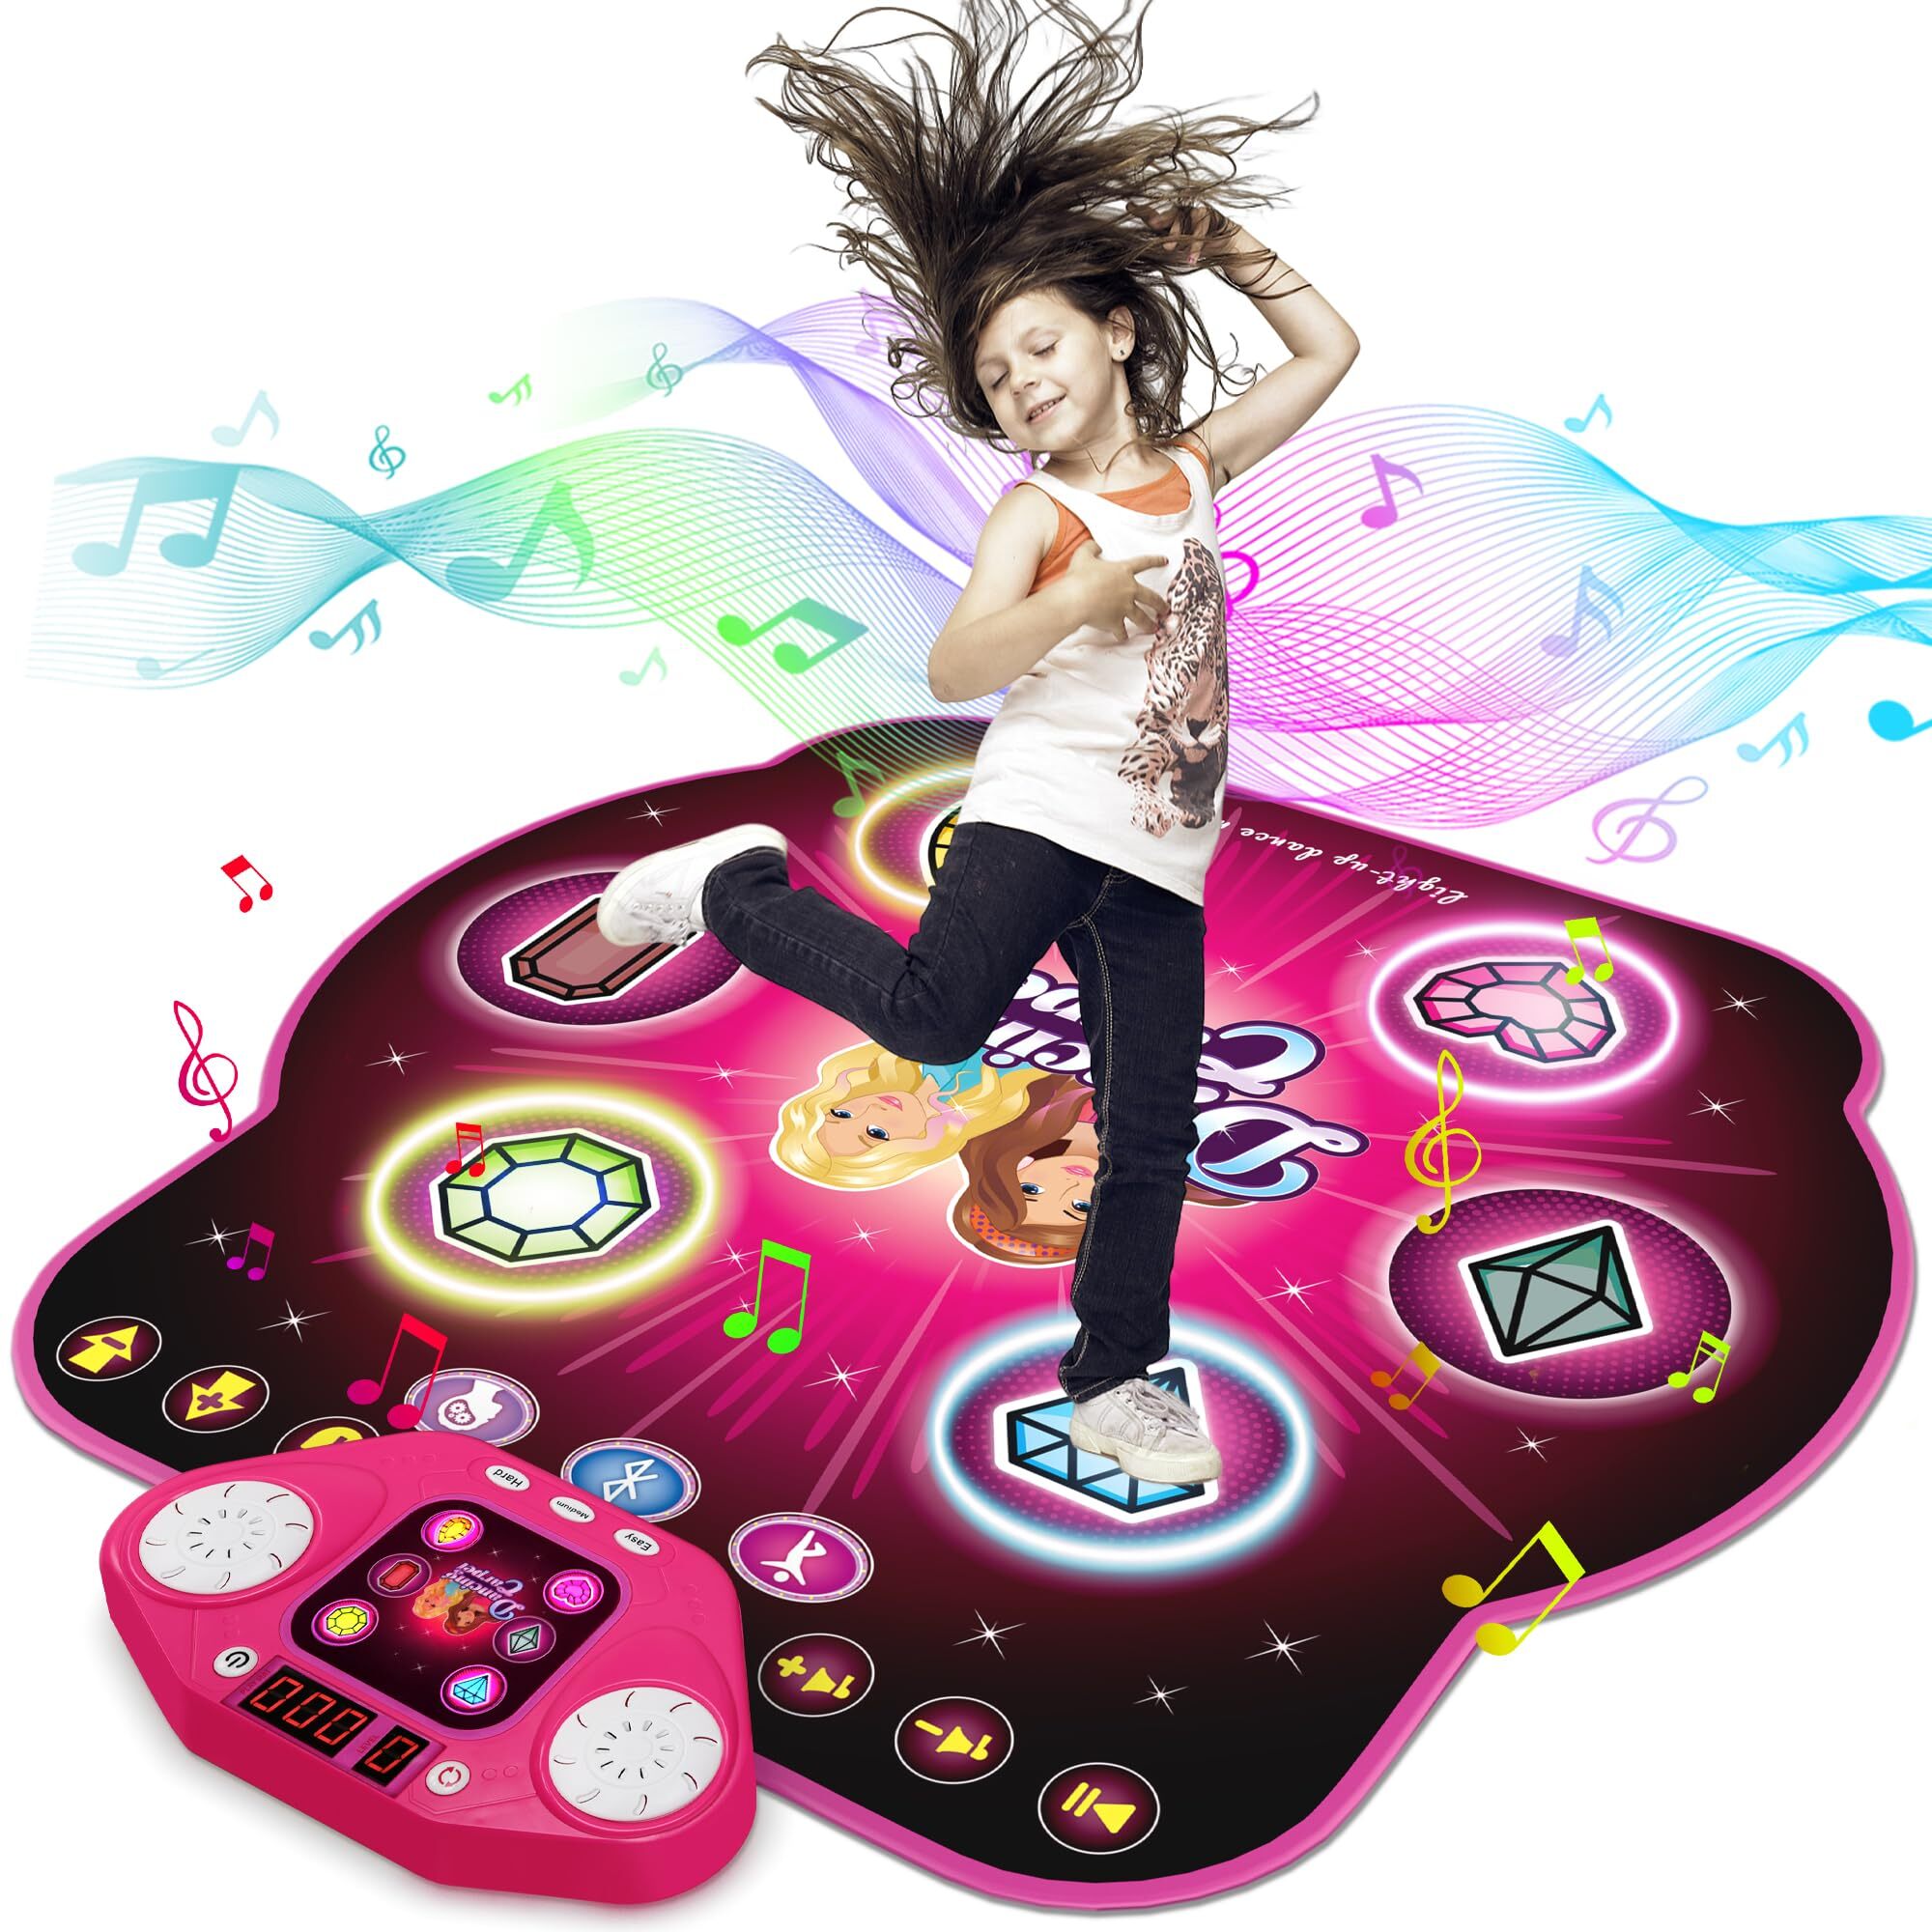 PAFOLO Dance Mat Toys for 3-12 Year Old Kids,Electronic Dance Pad with Light-up 6-Button & Wireless Bluetooth,5 Game Modes Princess Dancing Mat, Birthday Xmas Gifts for 3 4 5 6 7 8 9 10+Year Old Girls